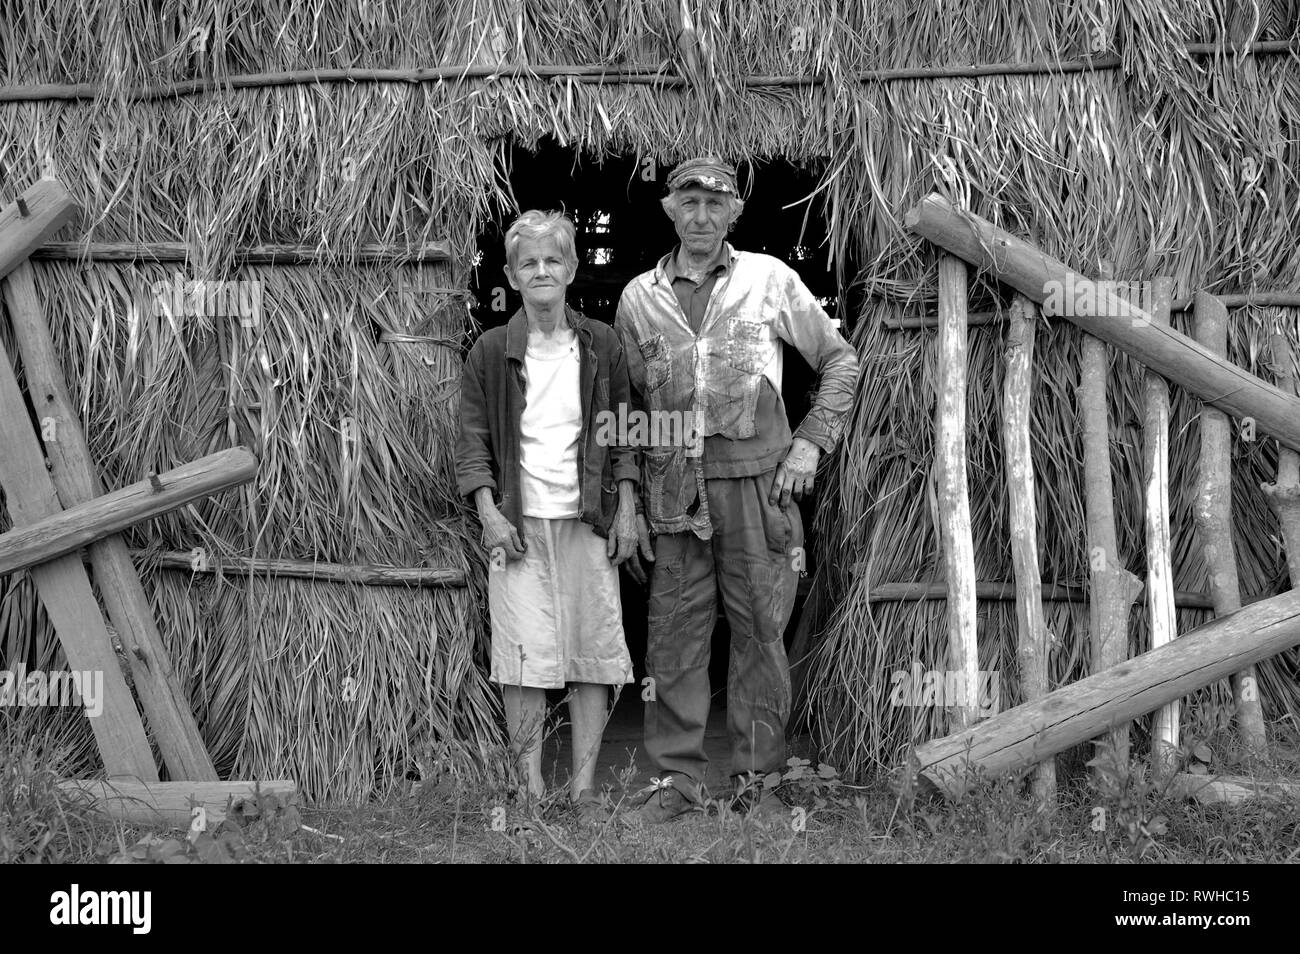 Vinales, Cuba- April 03,2003: Farmer couple posing in front of their drying shed in the Vinales Valley of Cuba Stock Photo